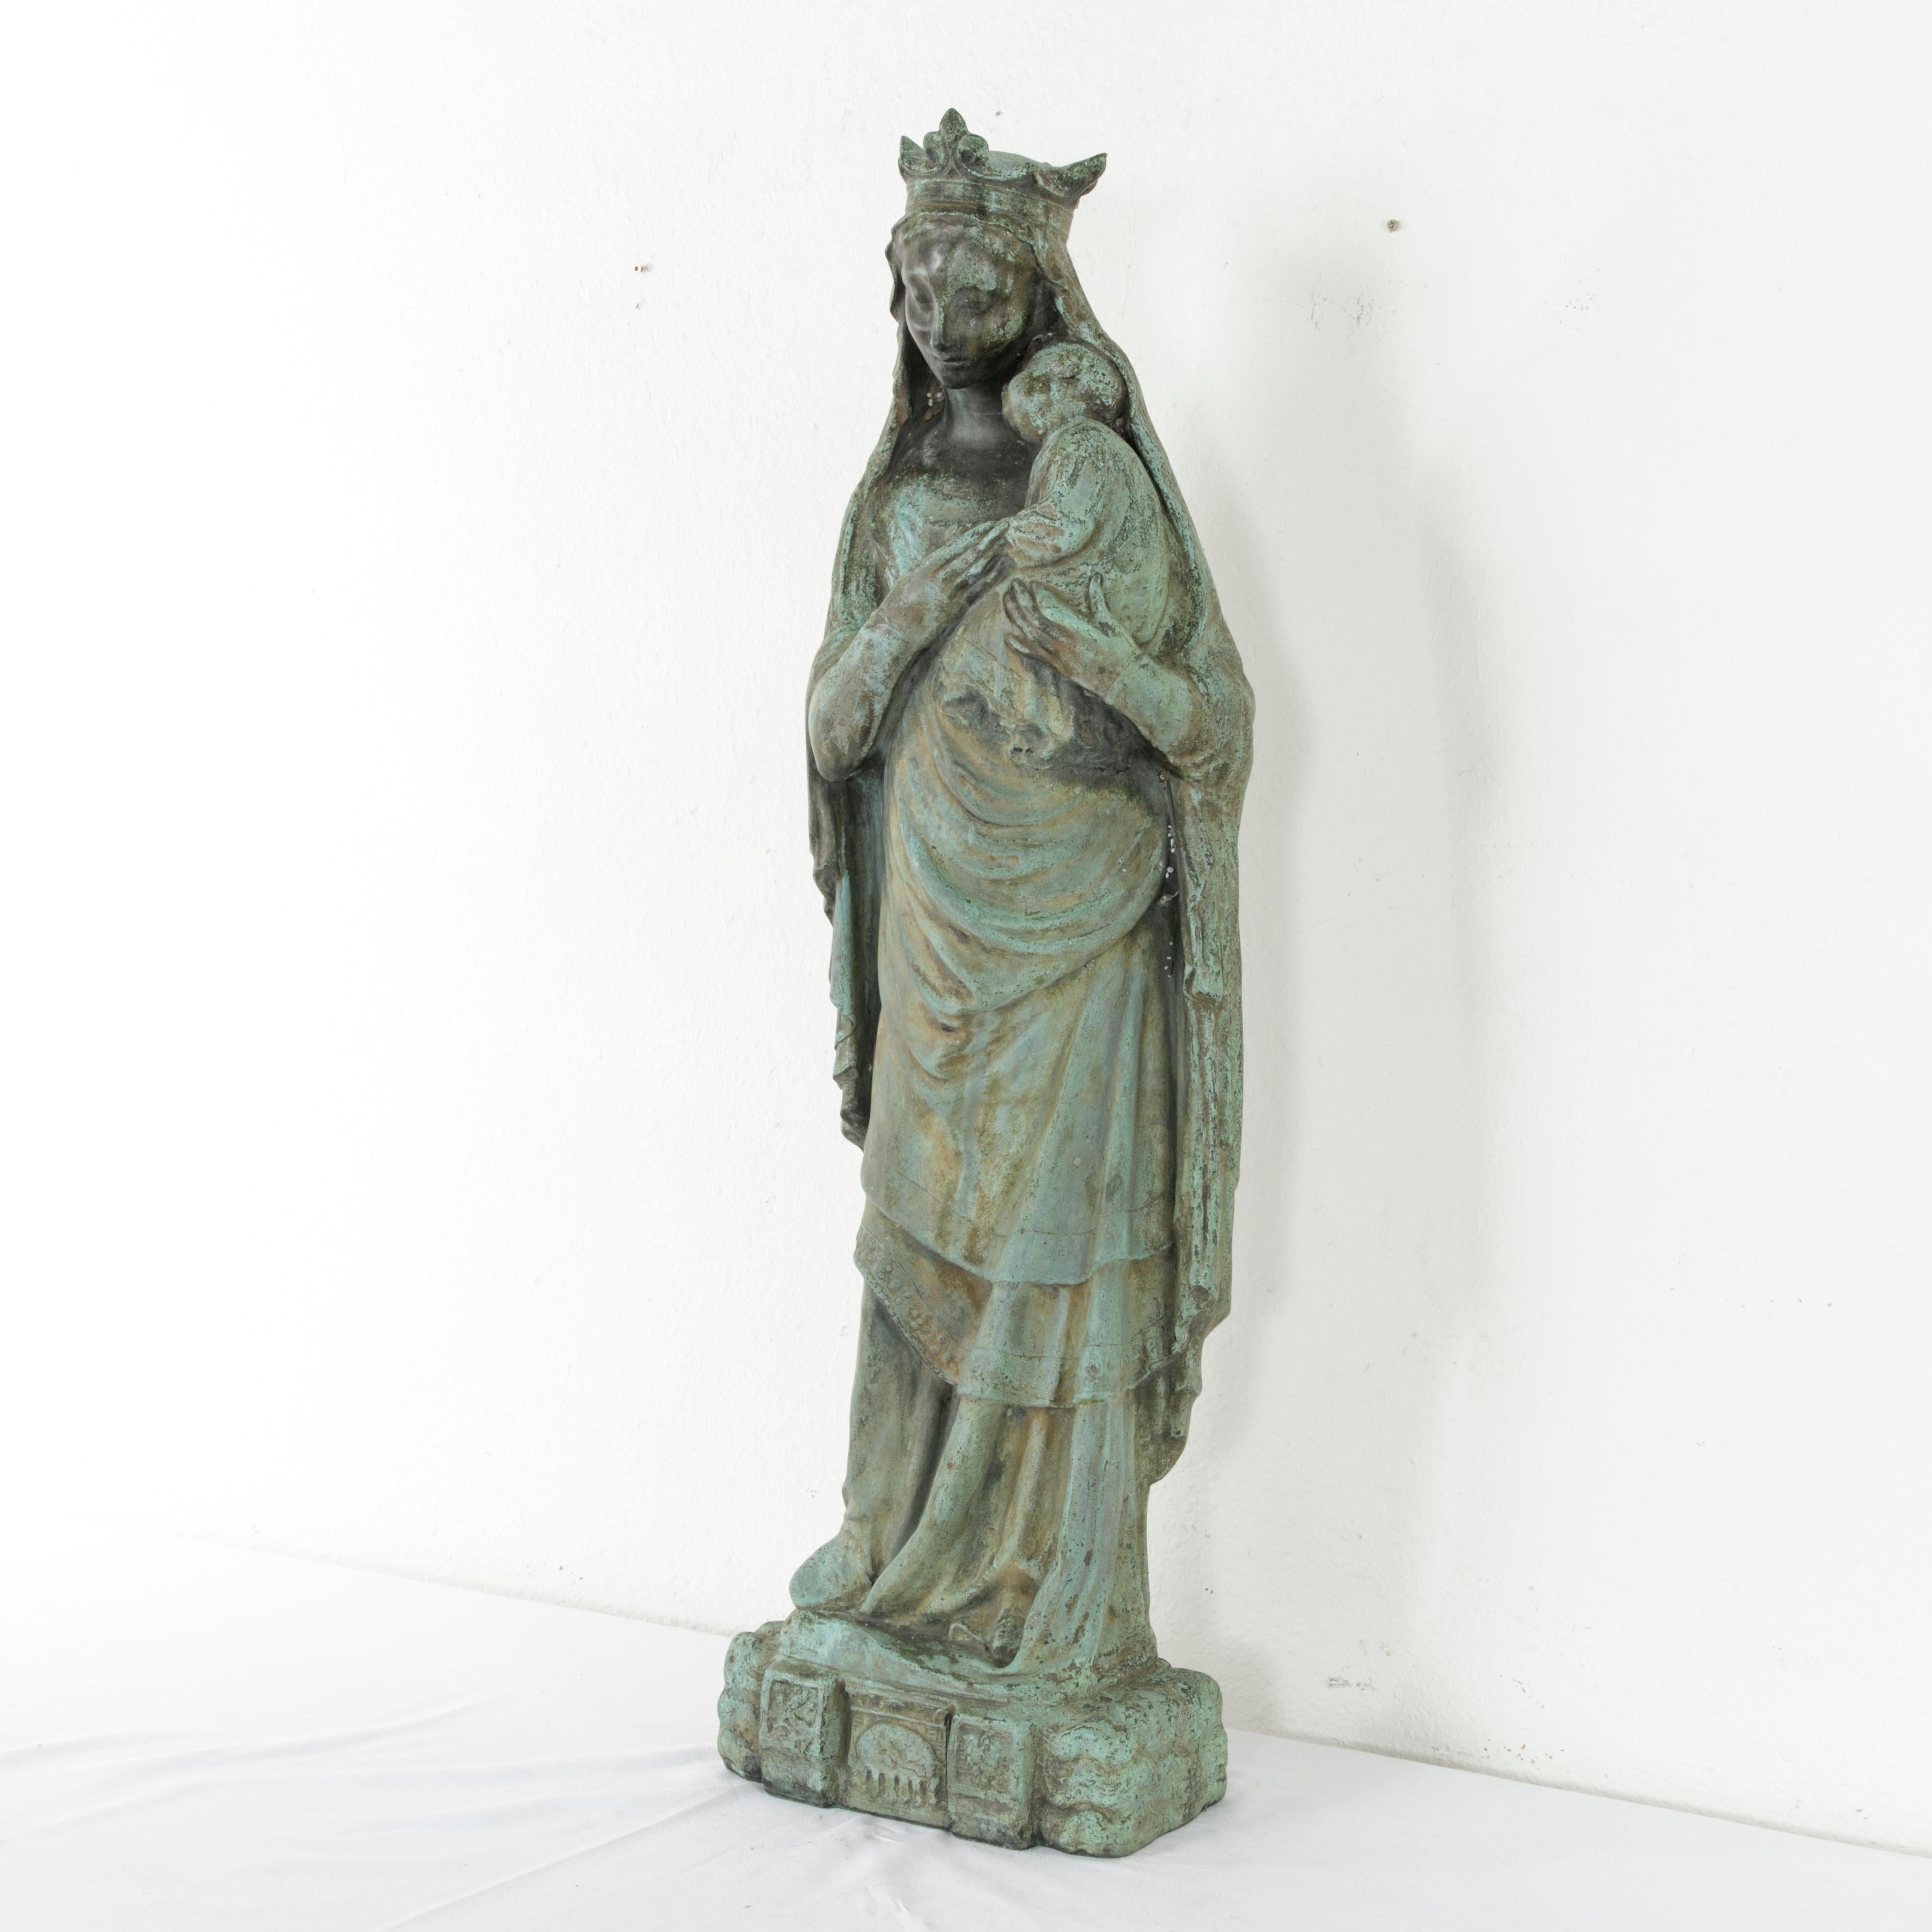 Standing at an impressive 41 inches in height, this large bronze statue or sculpture of the Madonna and Child was originally in the courtyard of a convent in the region of Normandy, France. Signed by the artist Marcel Declerck and dated 1922, this